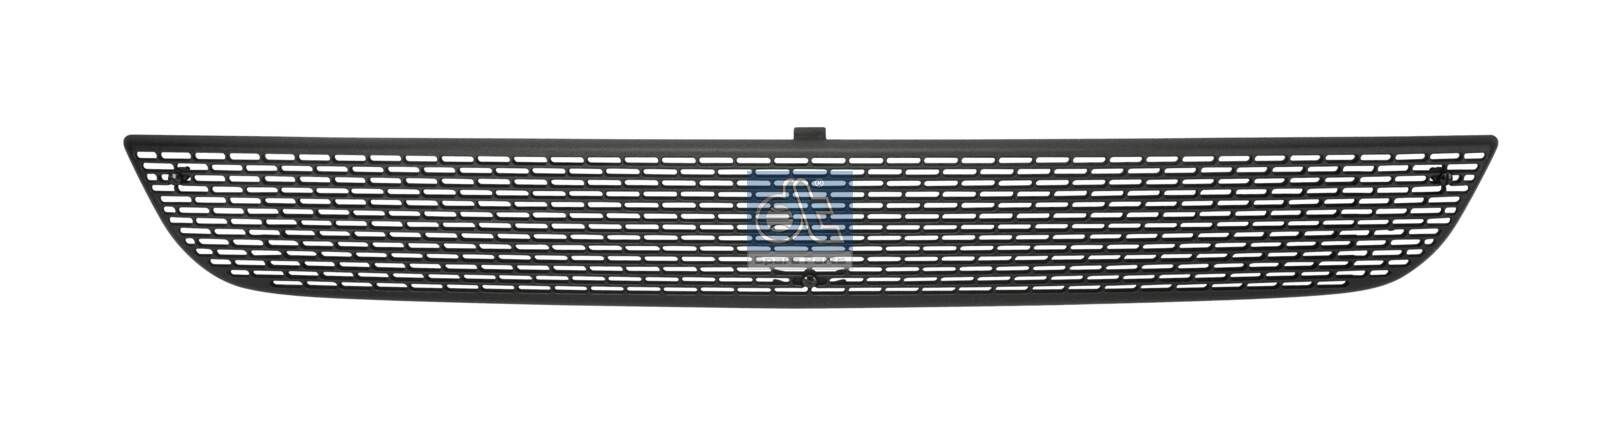 DT Spare Parts 5.64170 Radiator Grille